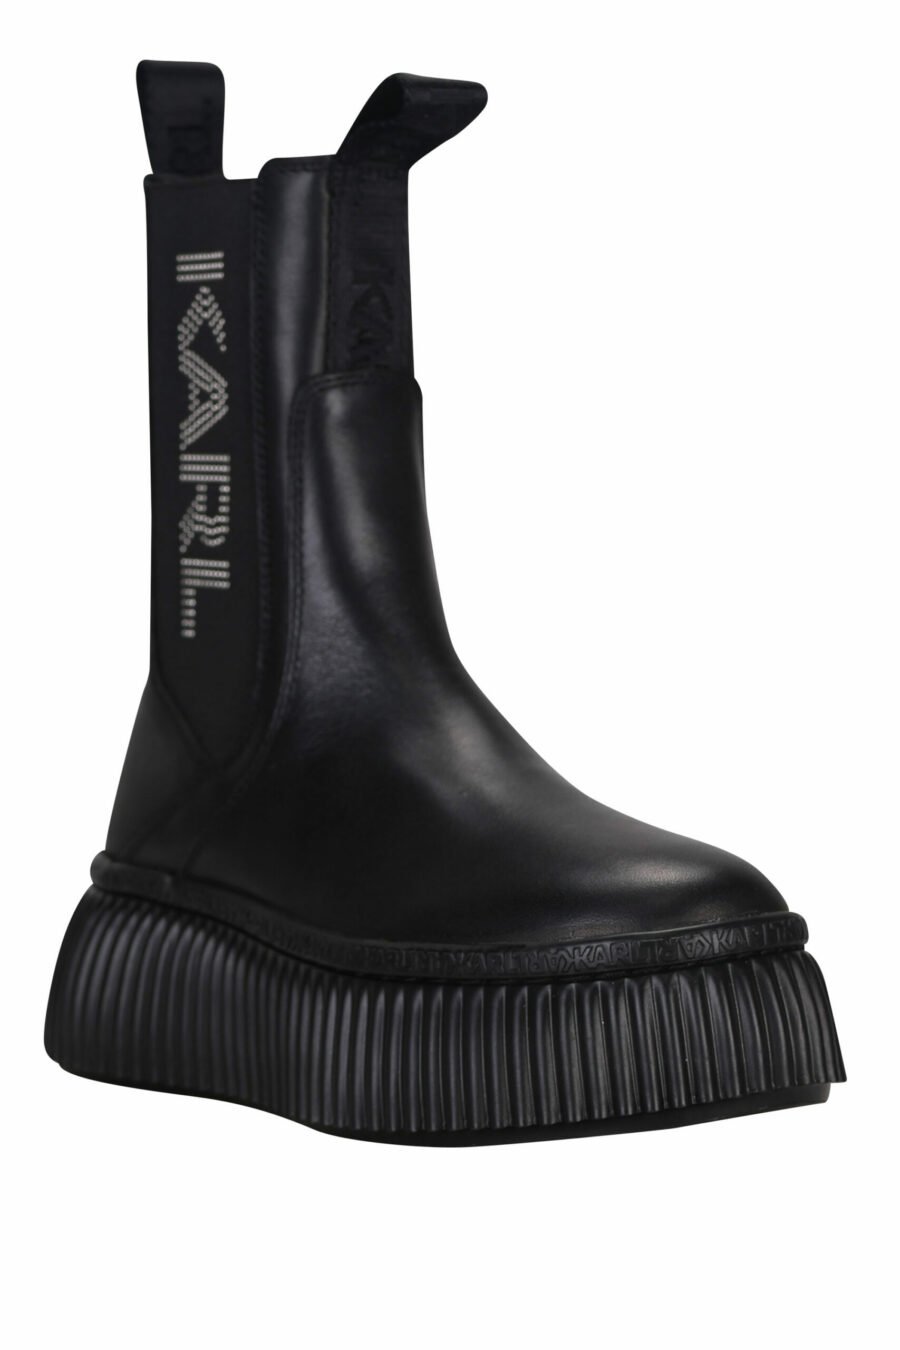 Black ankle boots with vertical logo and platform - 5059529315176 1 scaled